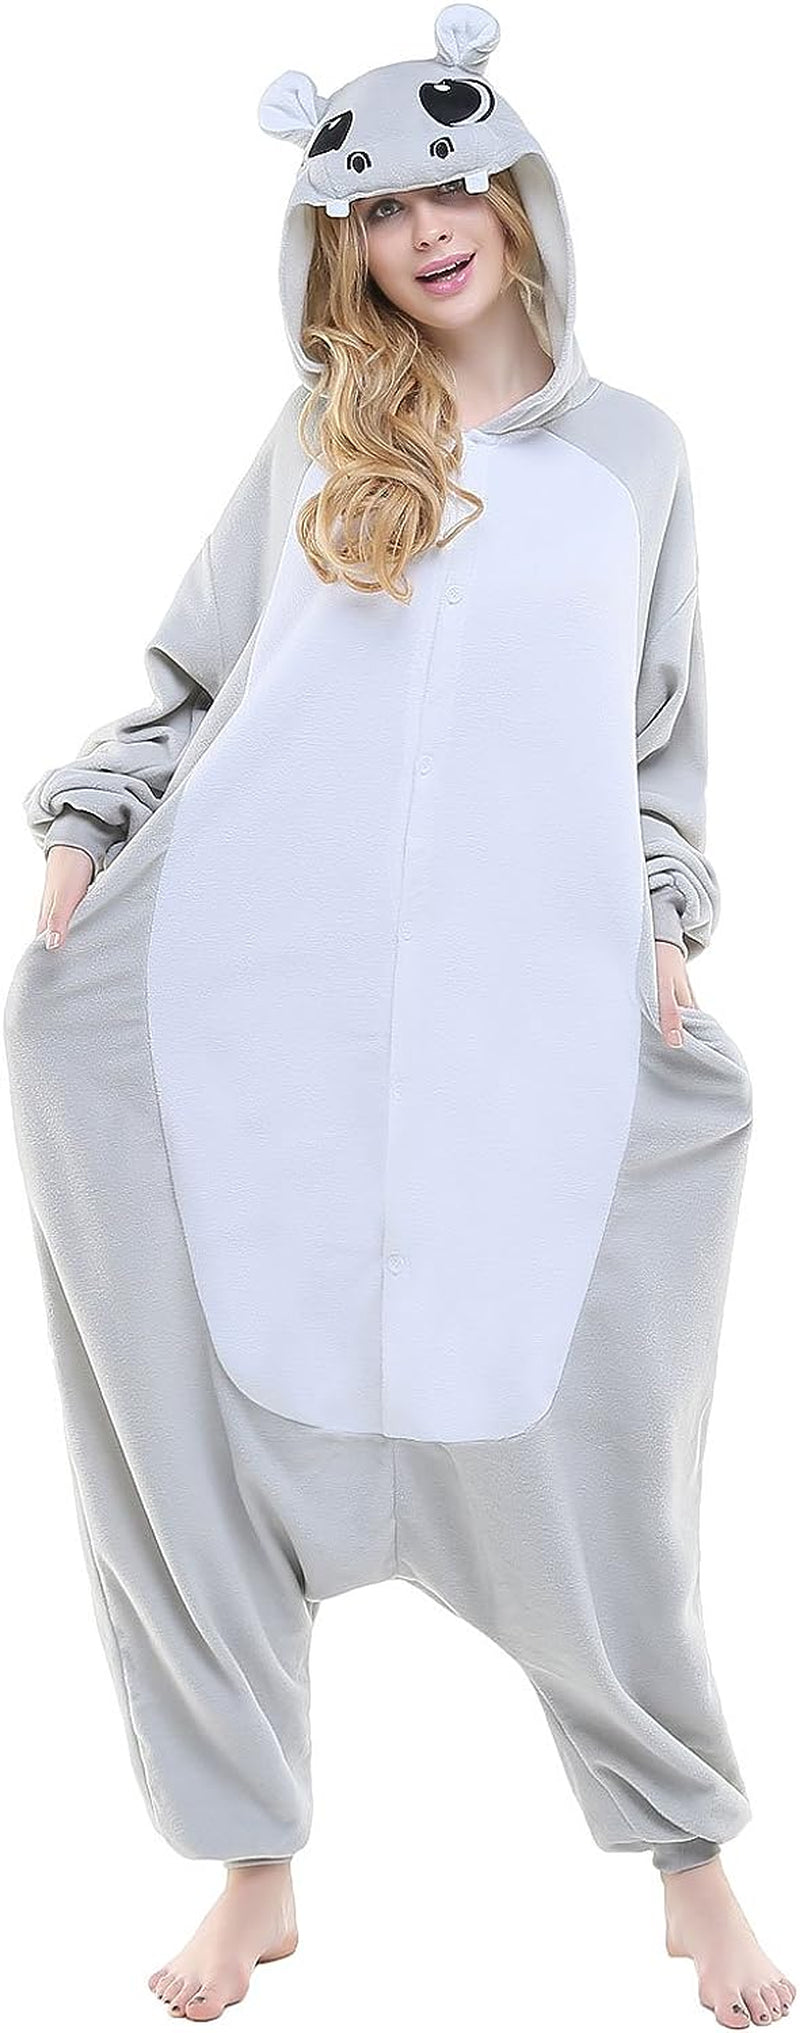 CANASOUR Adult Halloween Onesie Pajamas Anime Unisex Cosplay One Piece Anime Cosplay Christmas Party Costume  CANASOUR Grey Hippo X-Large 